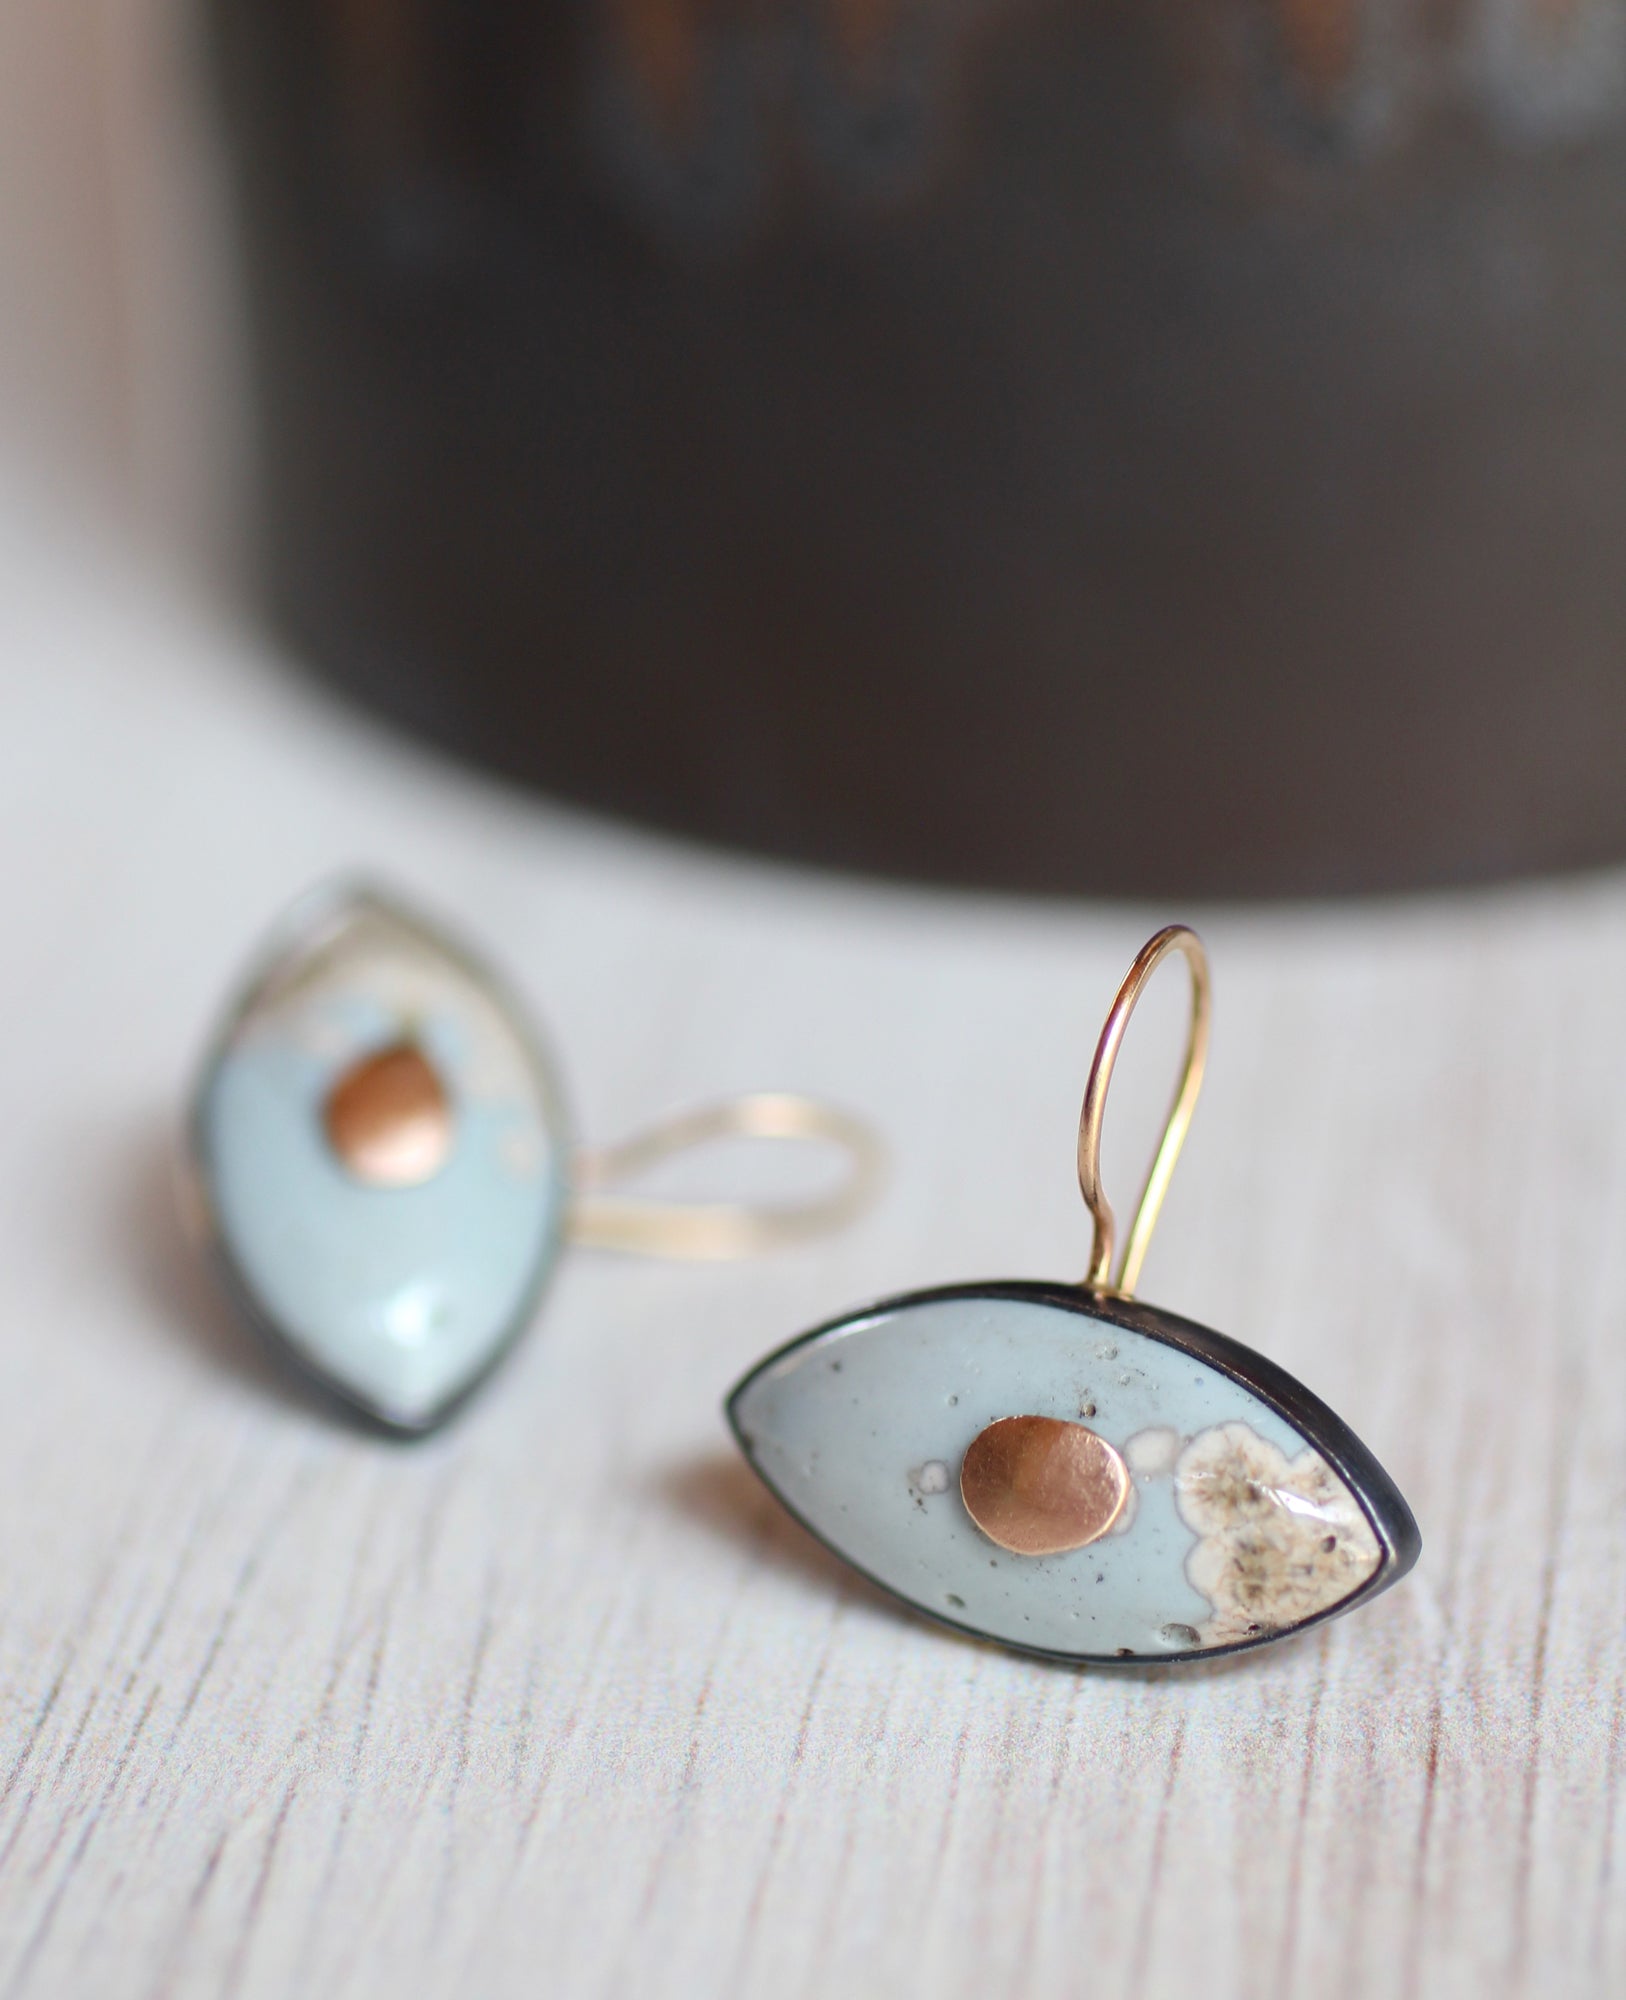 Protective Eye Earrings with 14k Gold